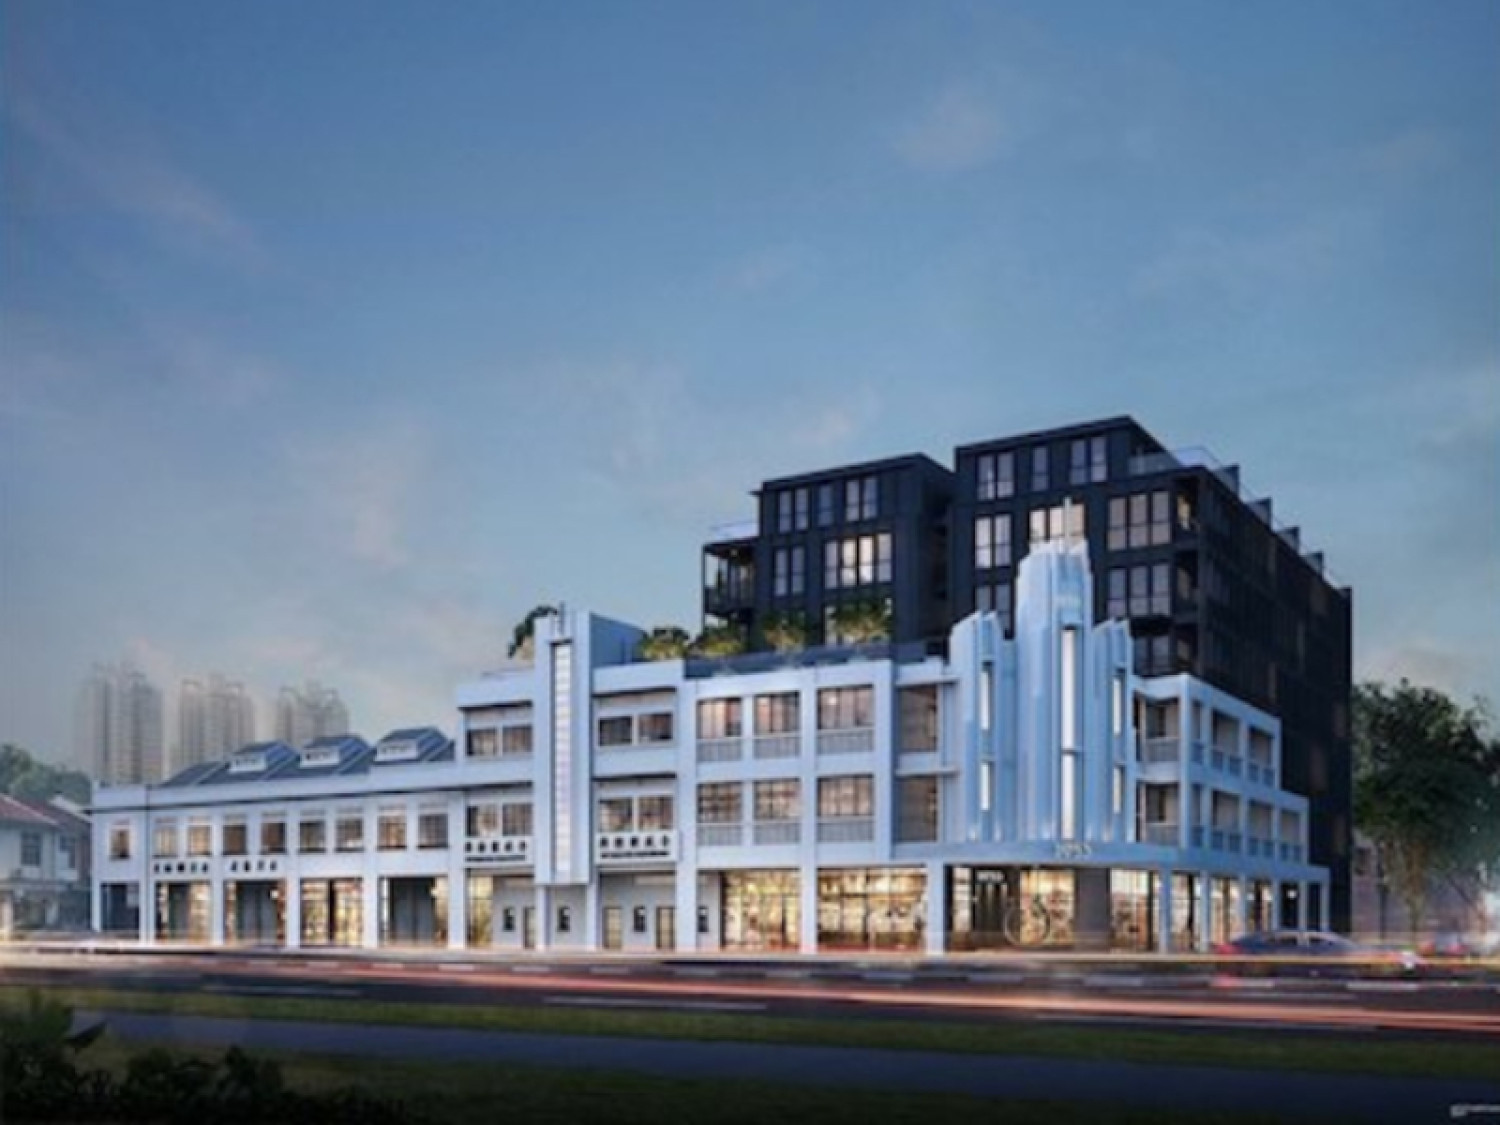 Mixed-use development 1953’s vintage appeal - Property News